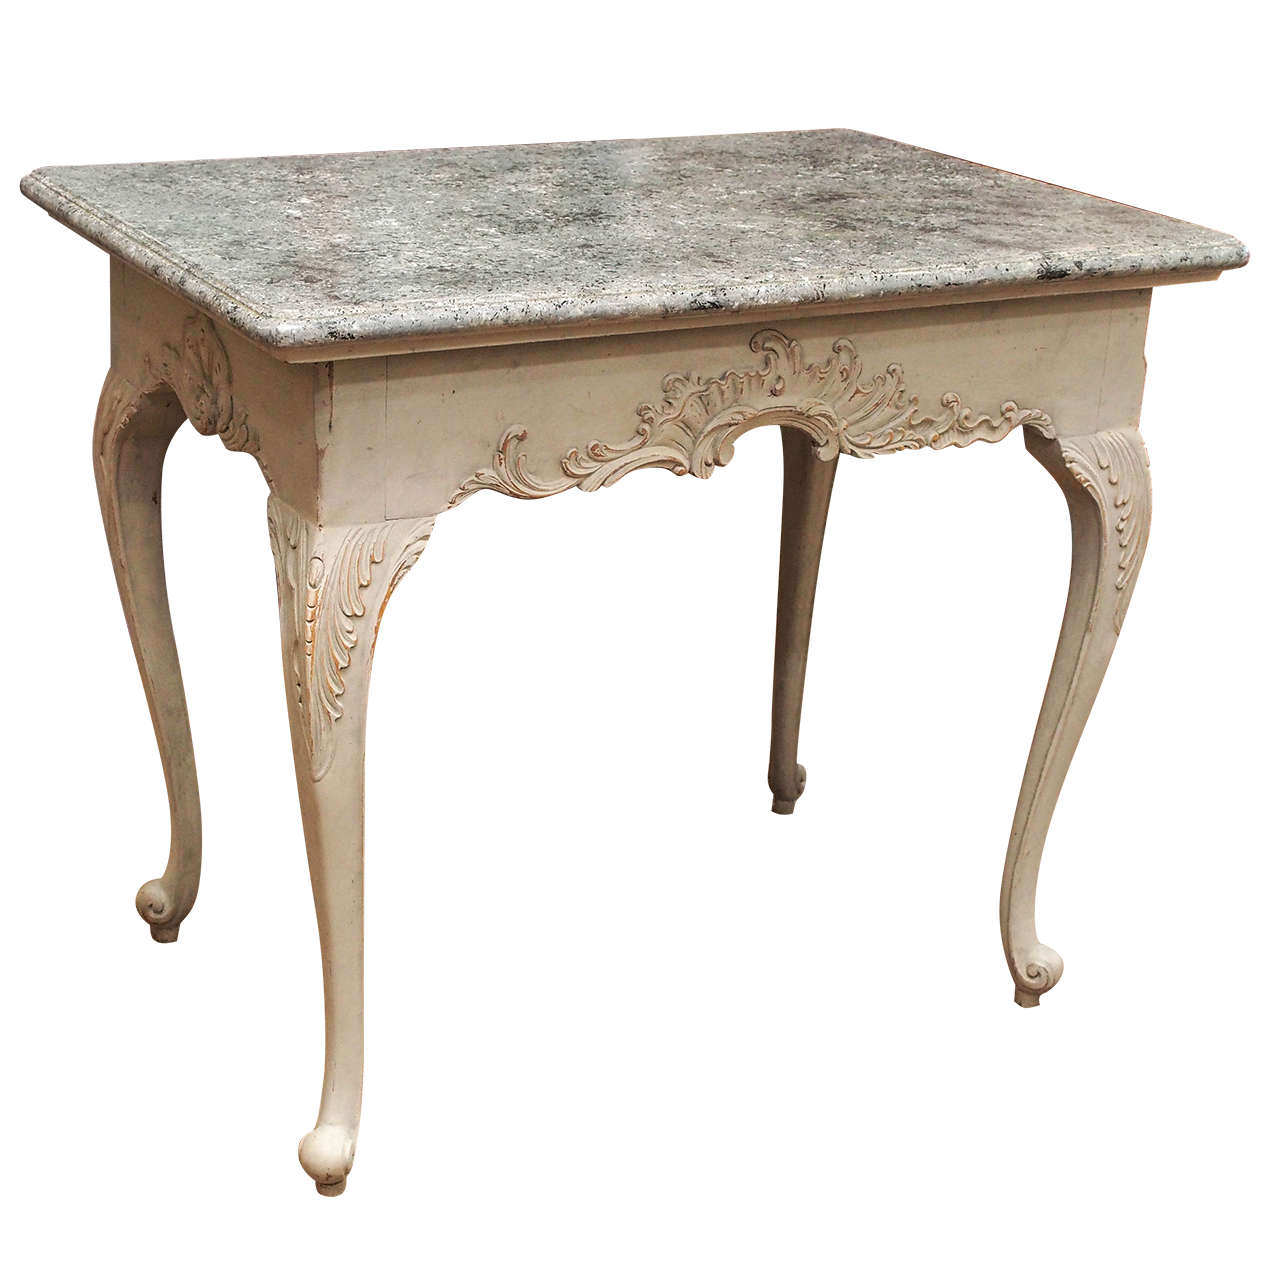 18th Century Gustavian Period Table with Faux Marble Top